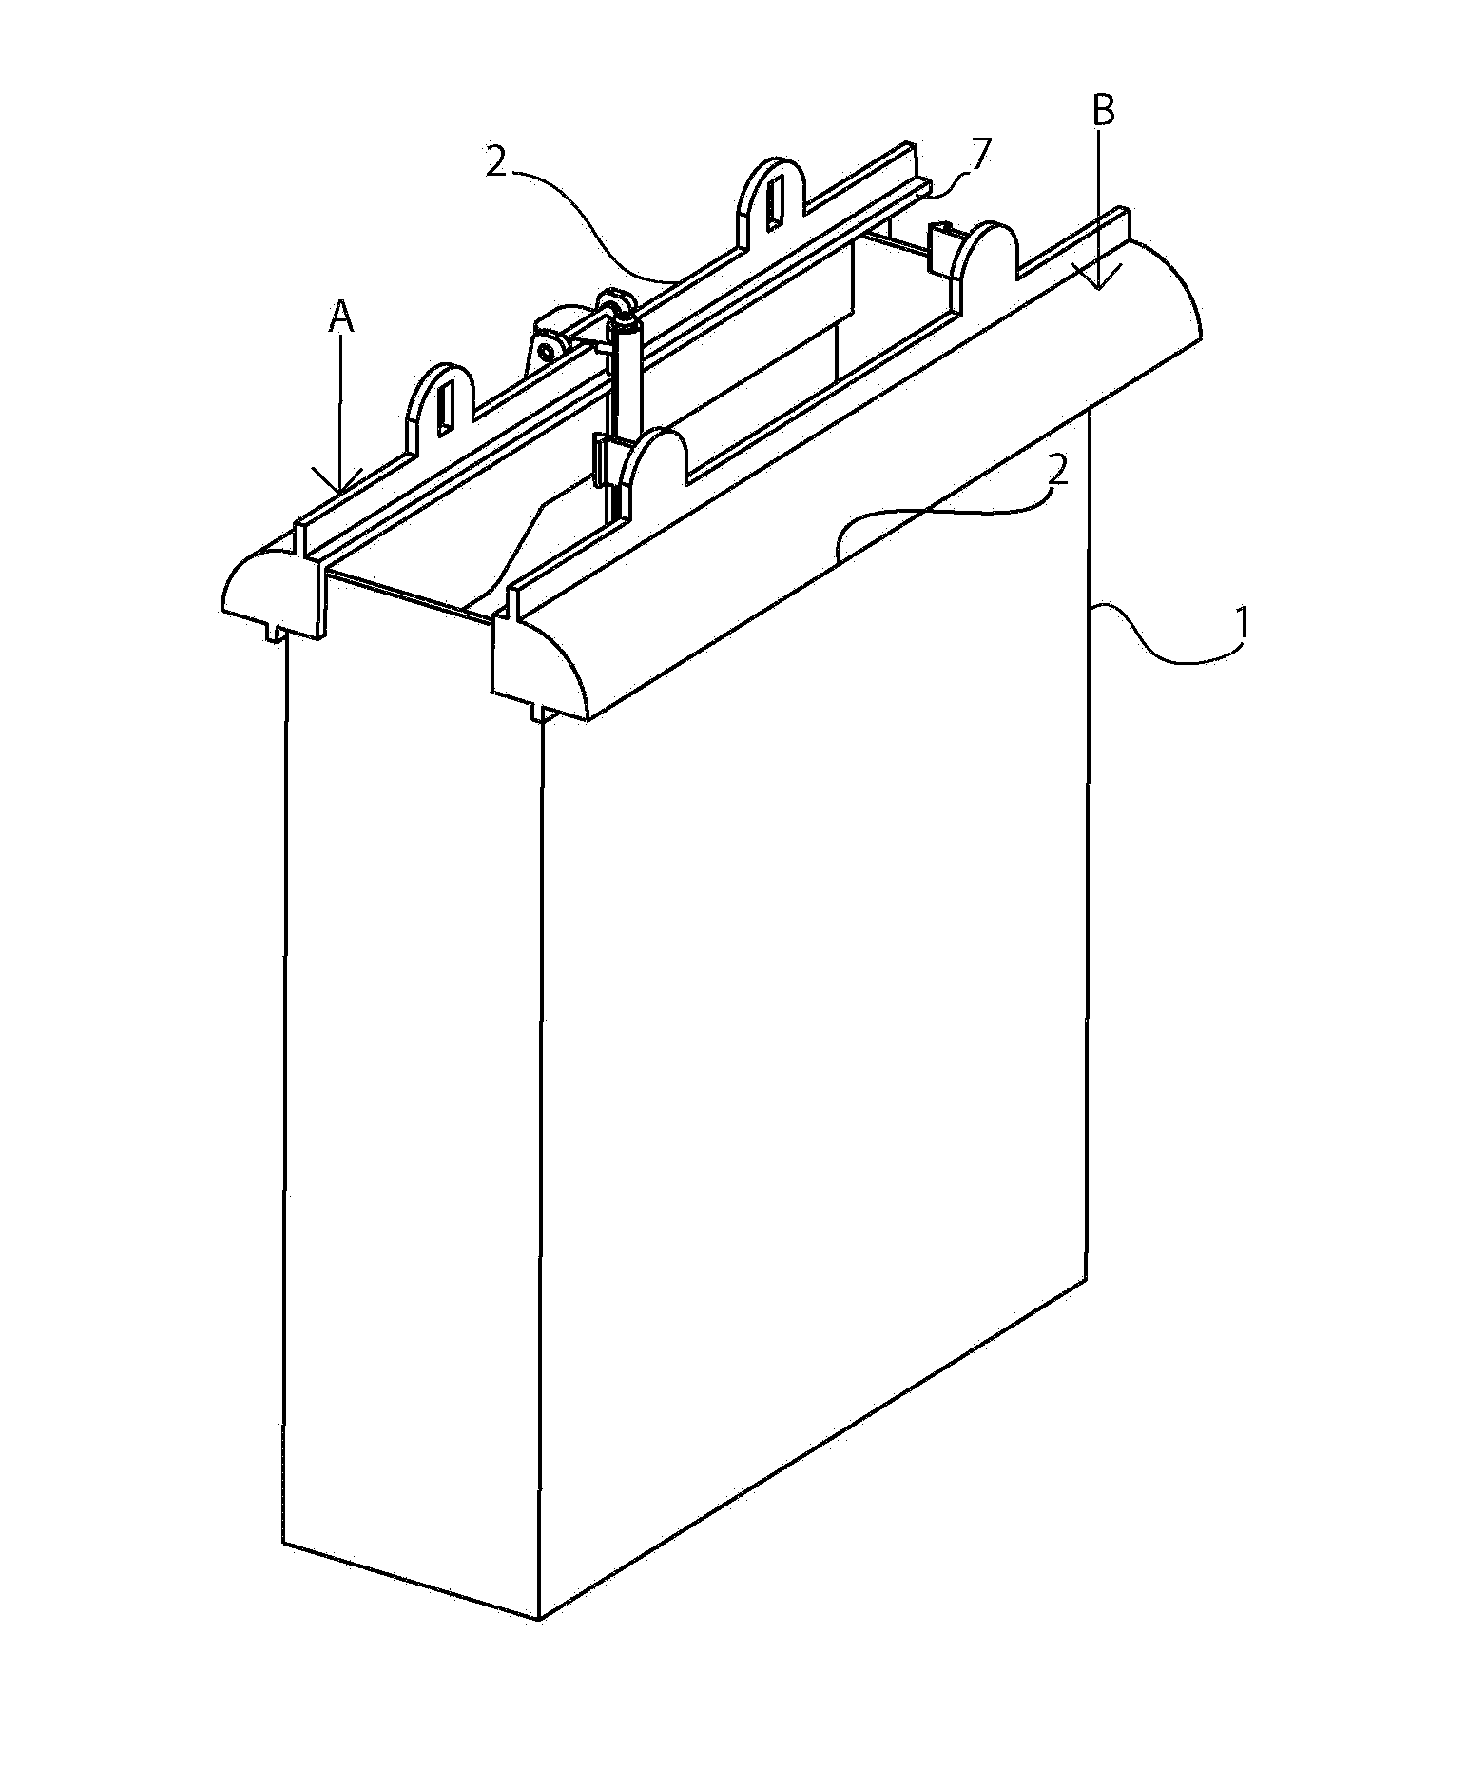 Box closure system, device and method with means to be attached and integrated into boxes